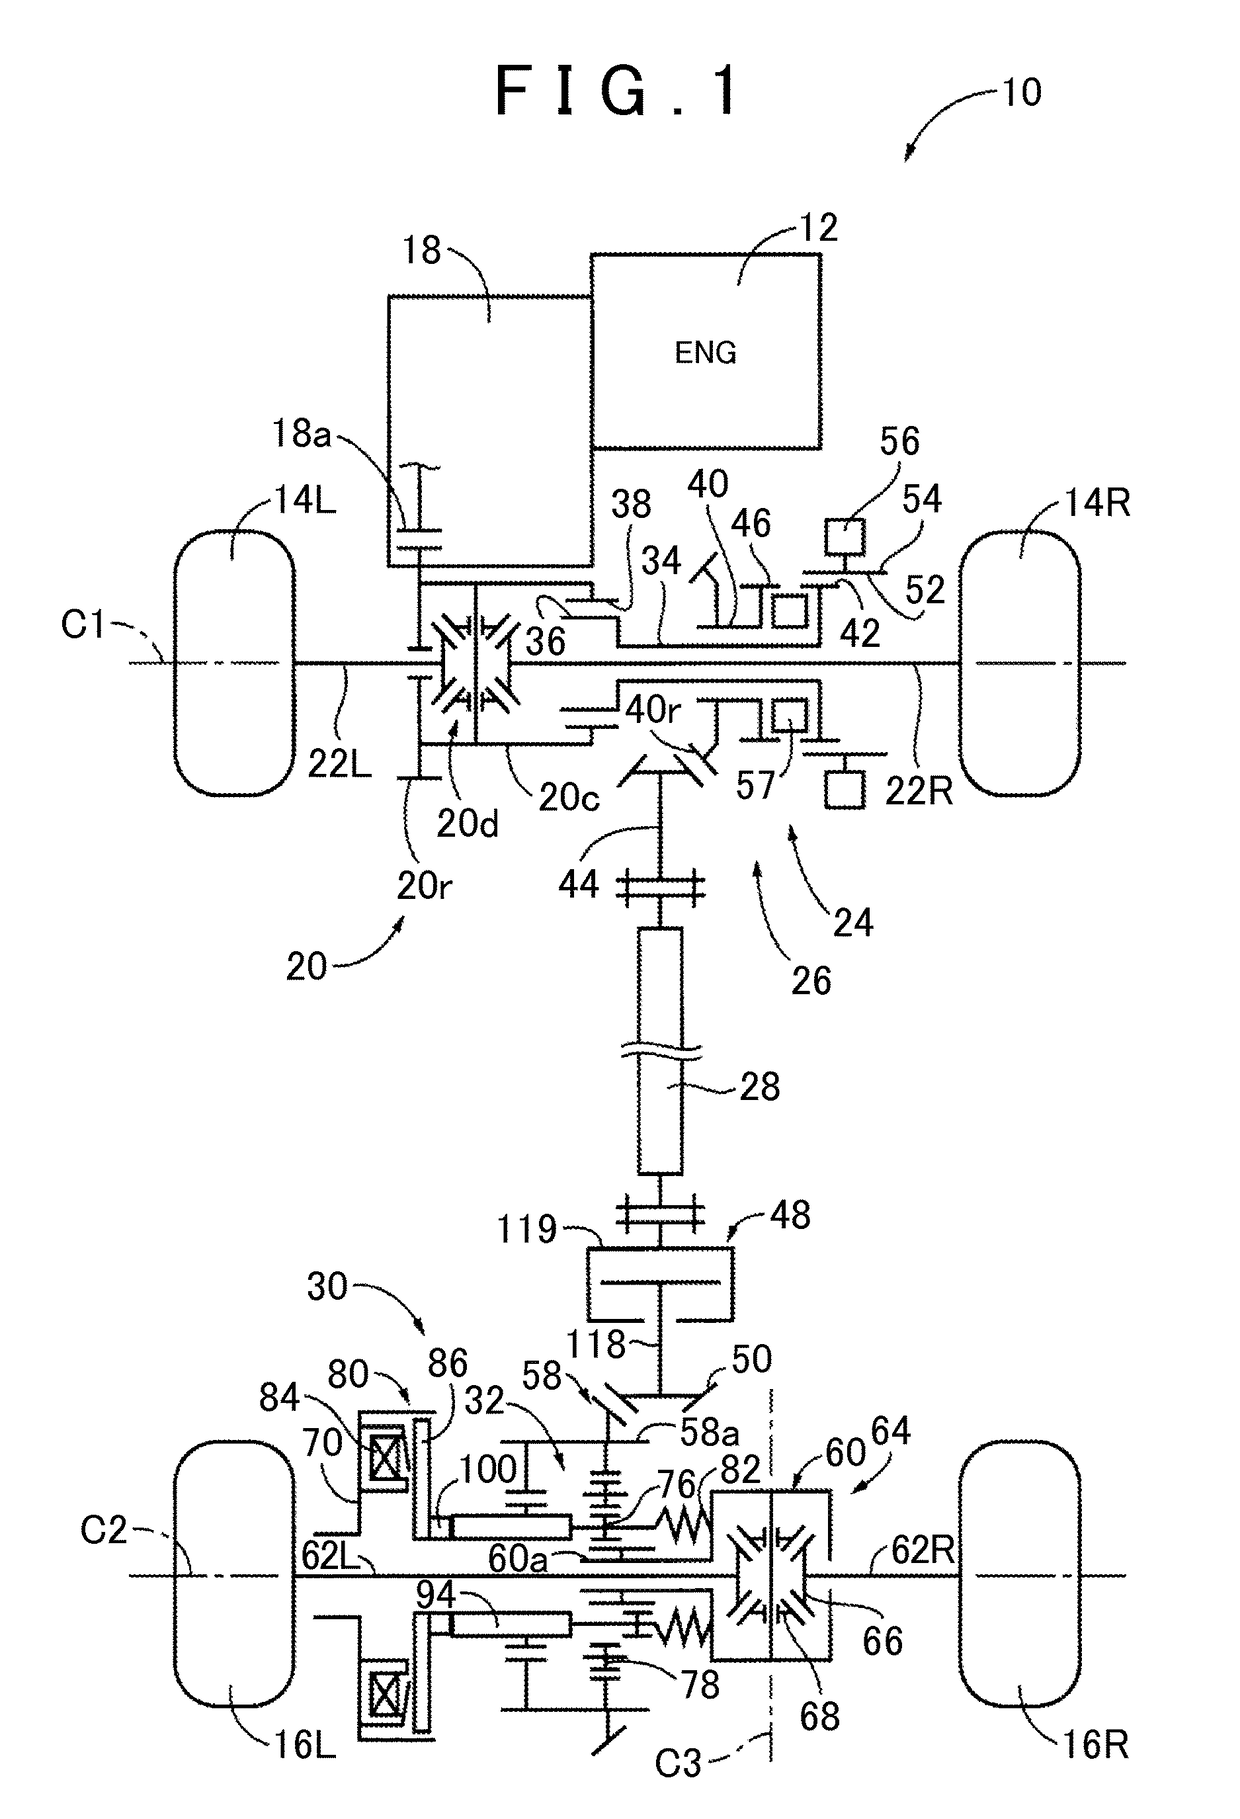 Auxiliary drive wheel-side differential unit for four-wheel drive vehicle